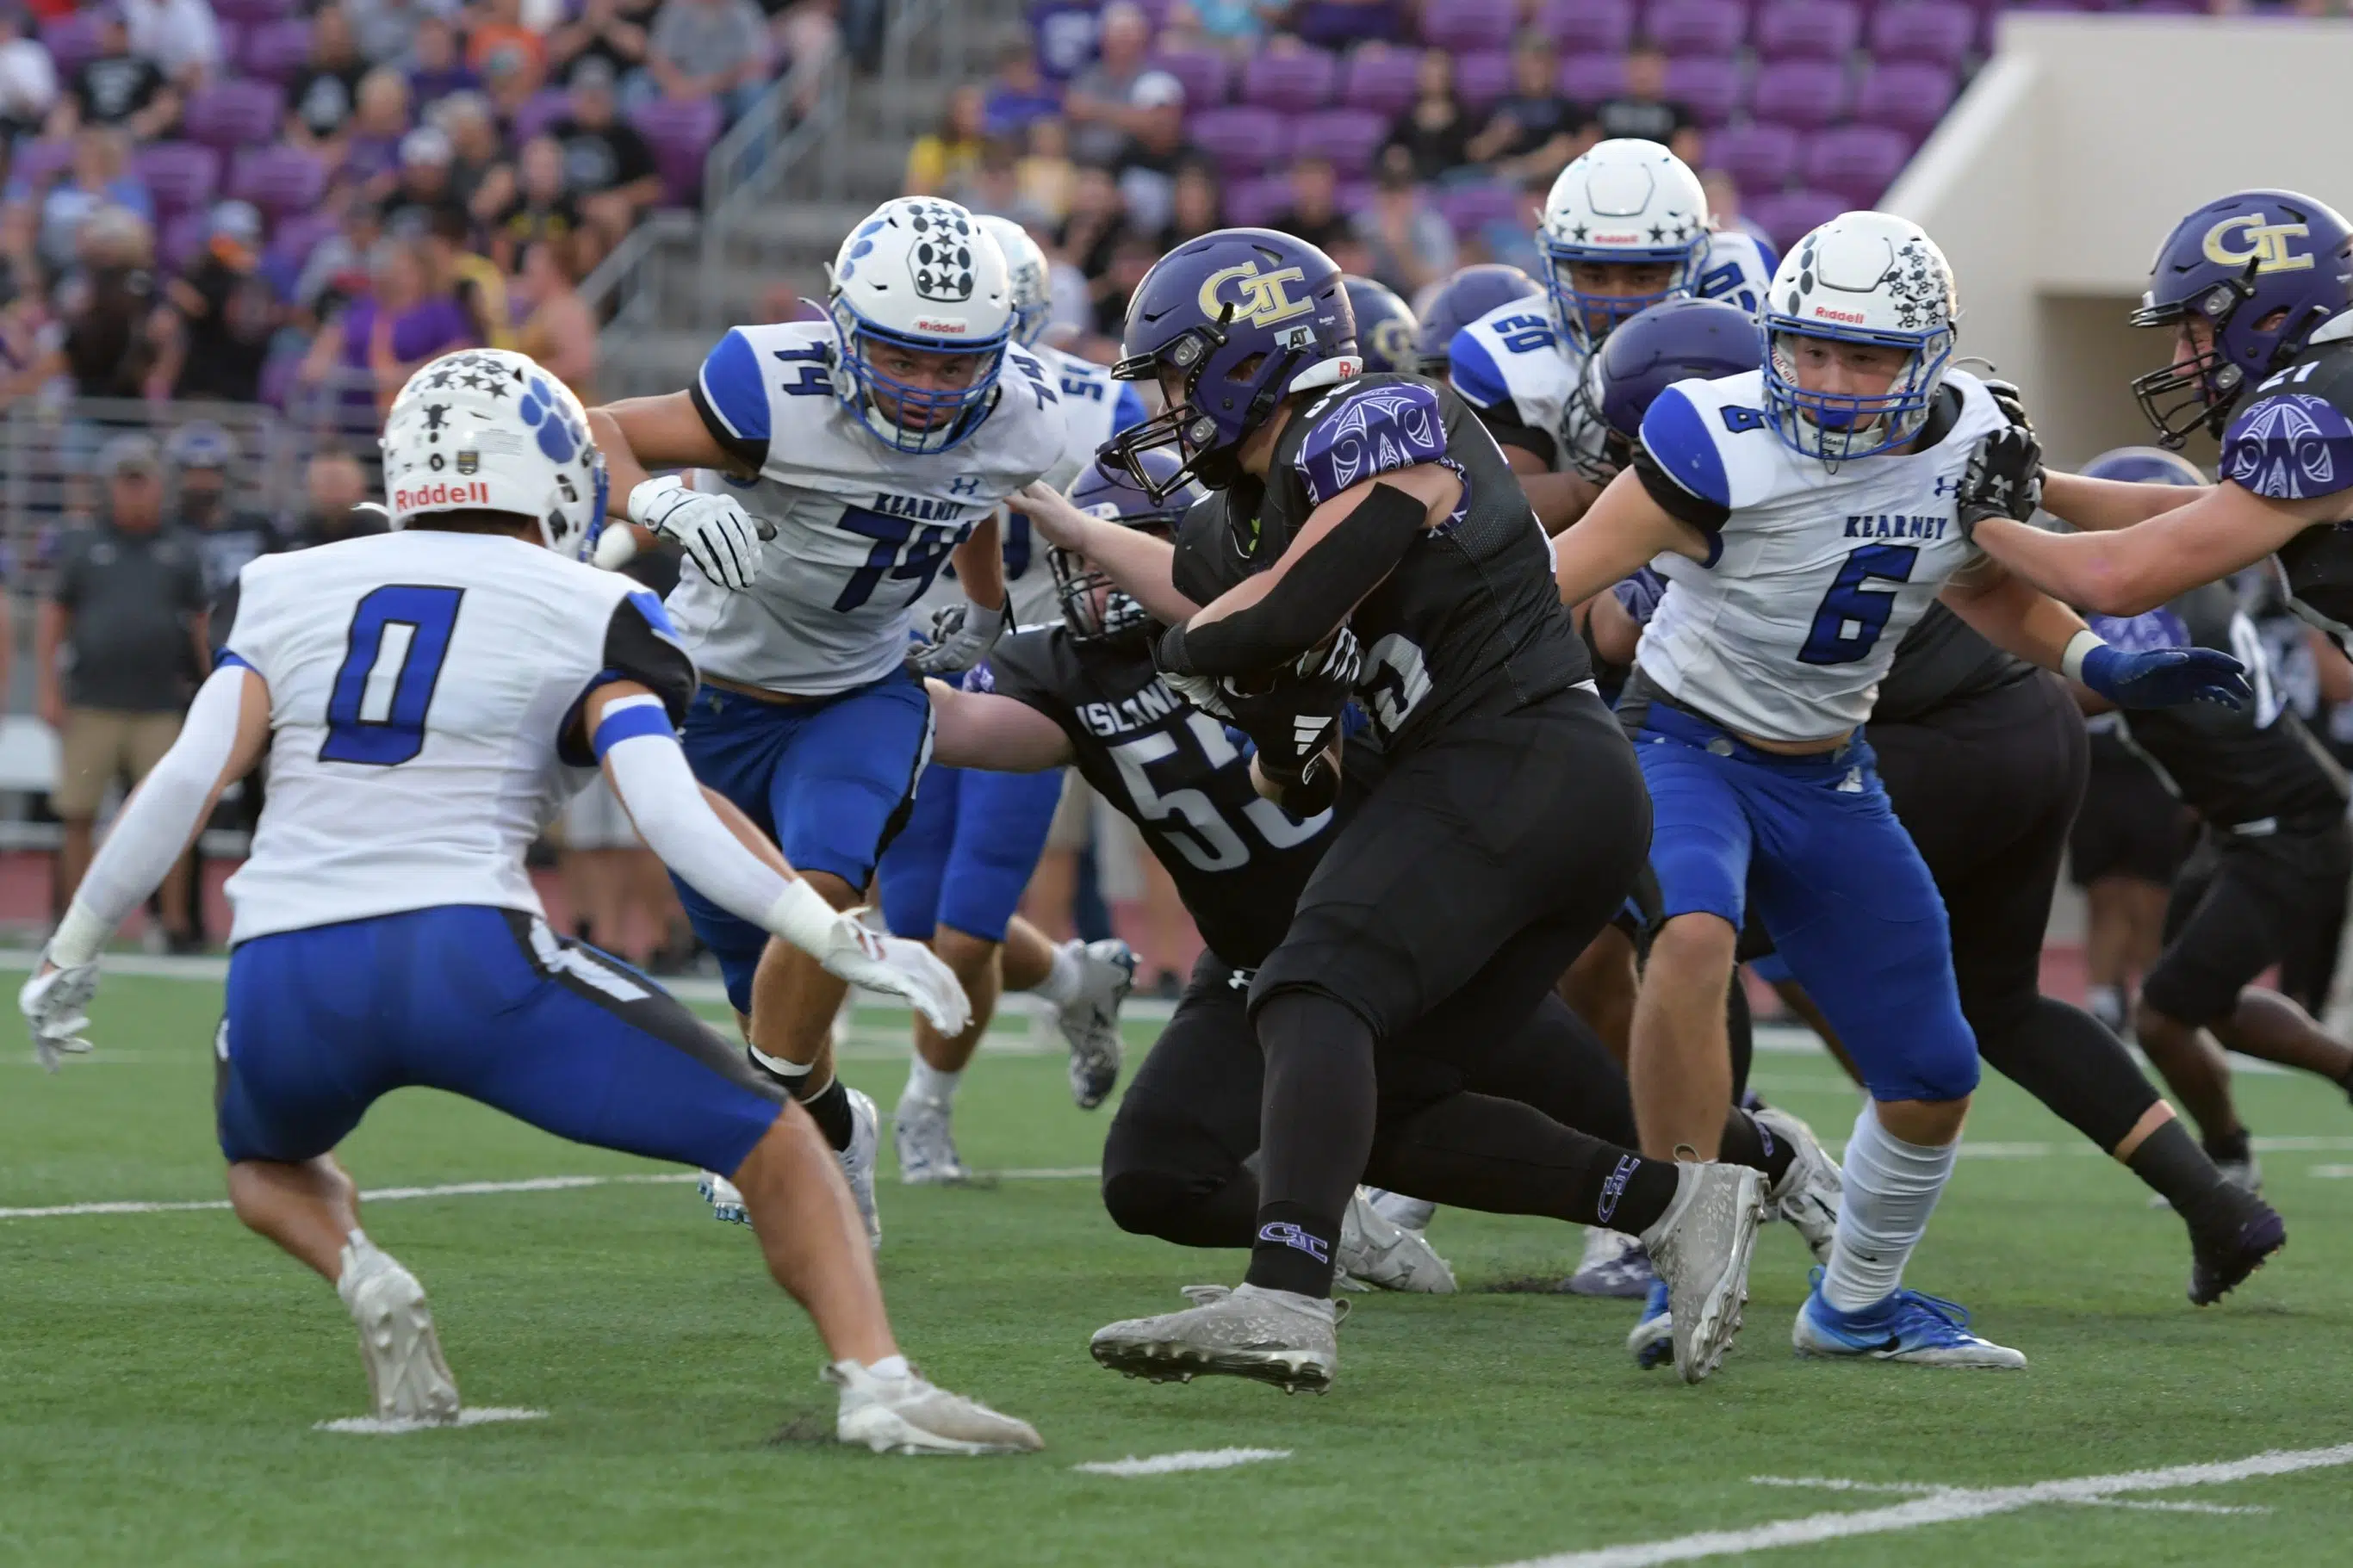 Playoff Rivalry Rematch: Kearney to Host GISH in First Round